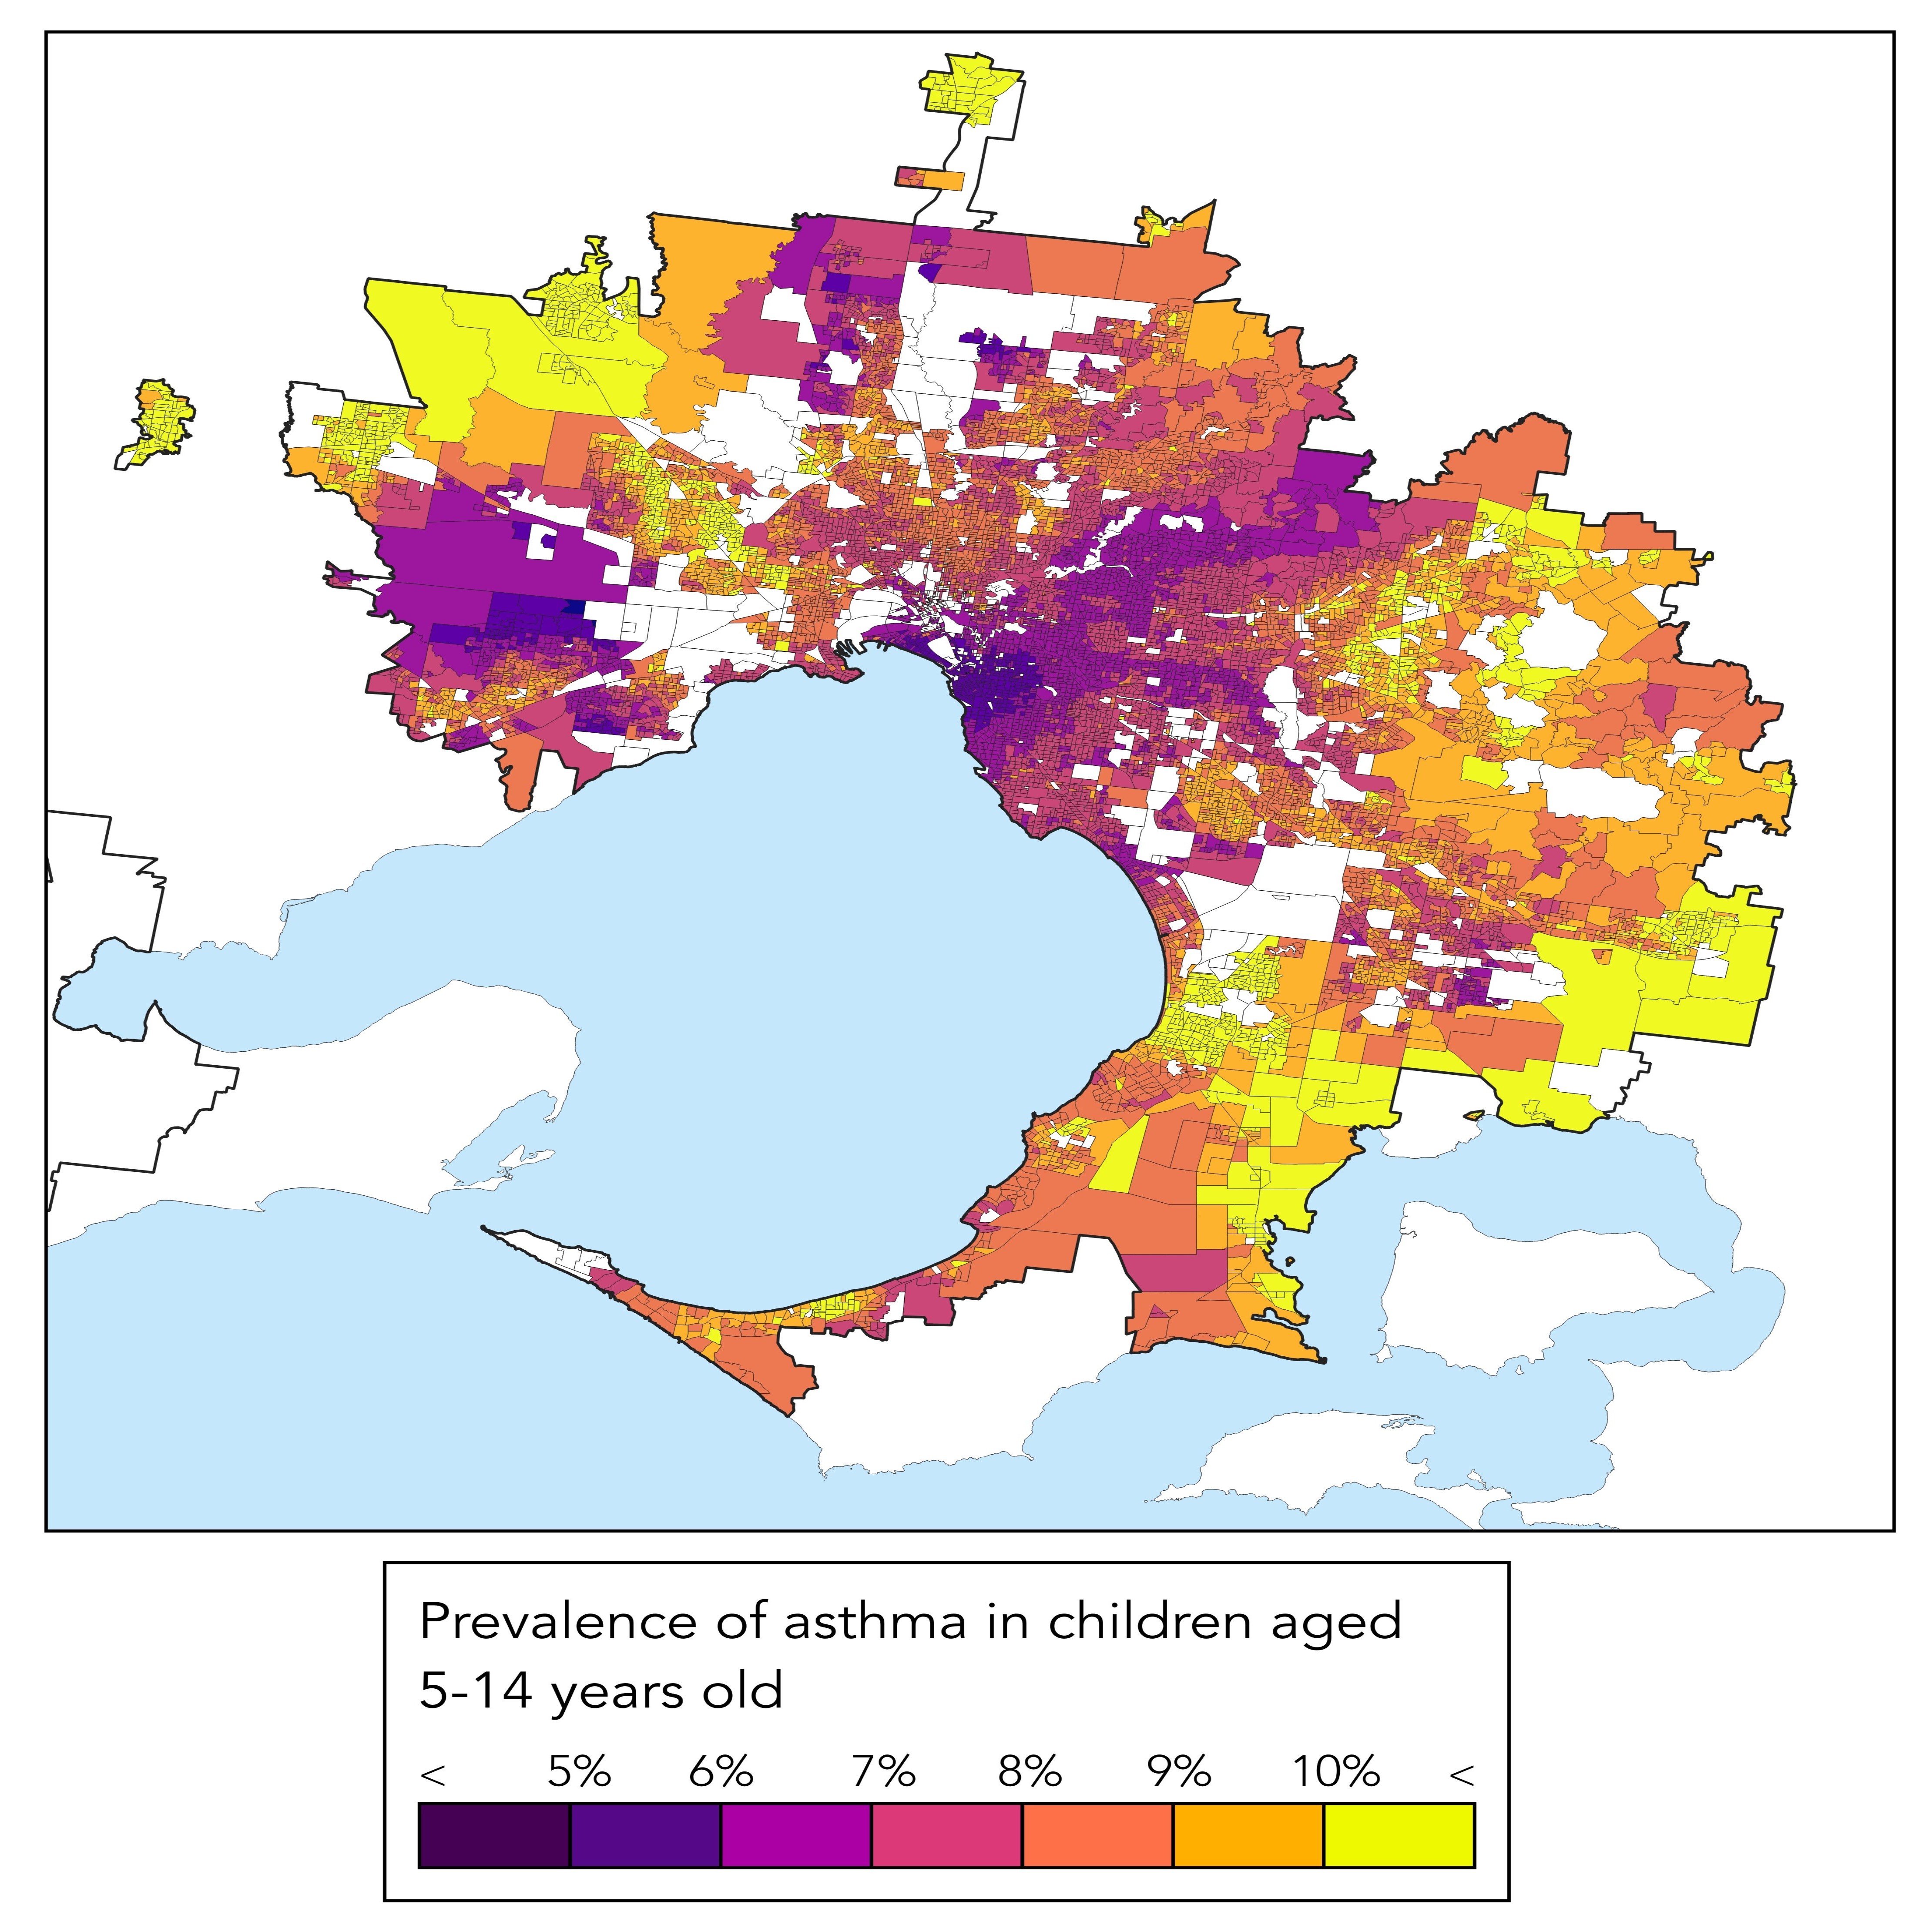 Asthma risk map for Melbourne showing with the colour yellow more asthma risk in outer suburbs